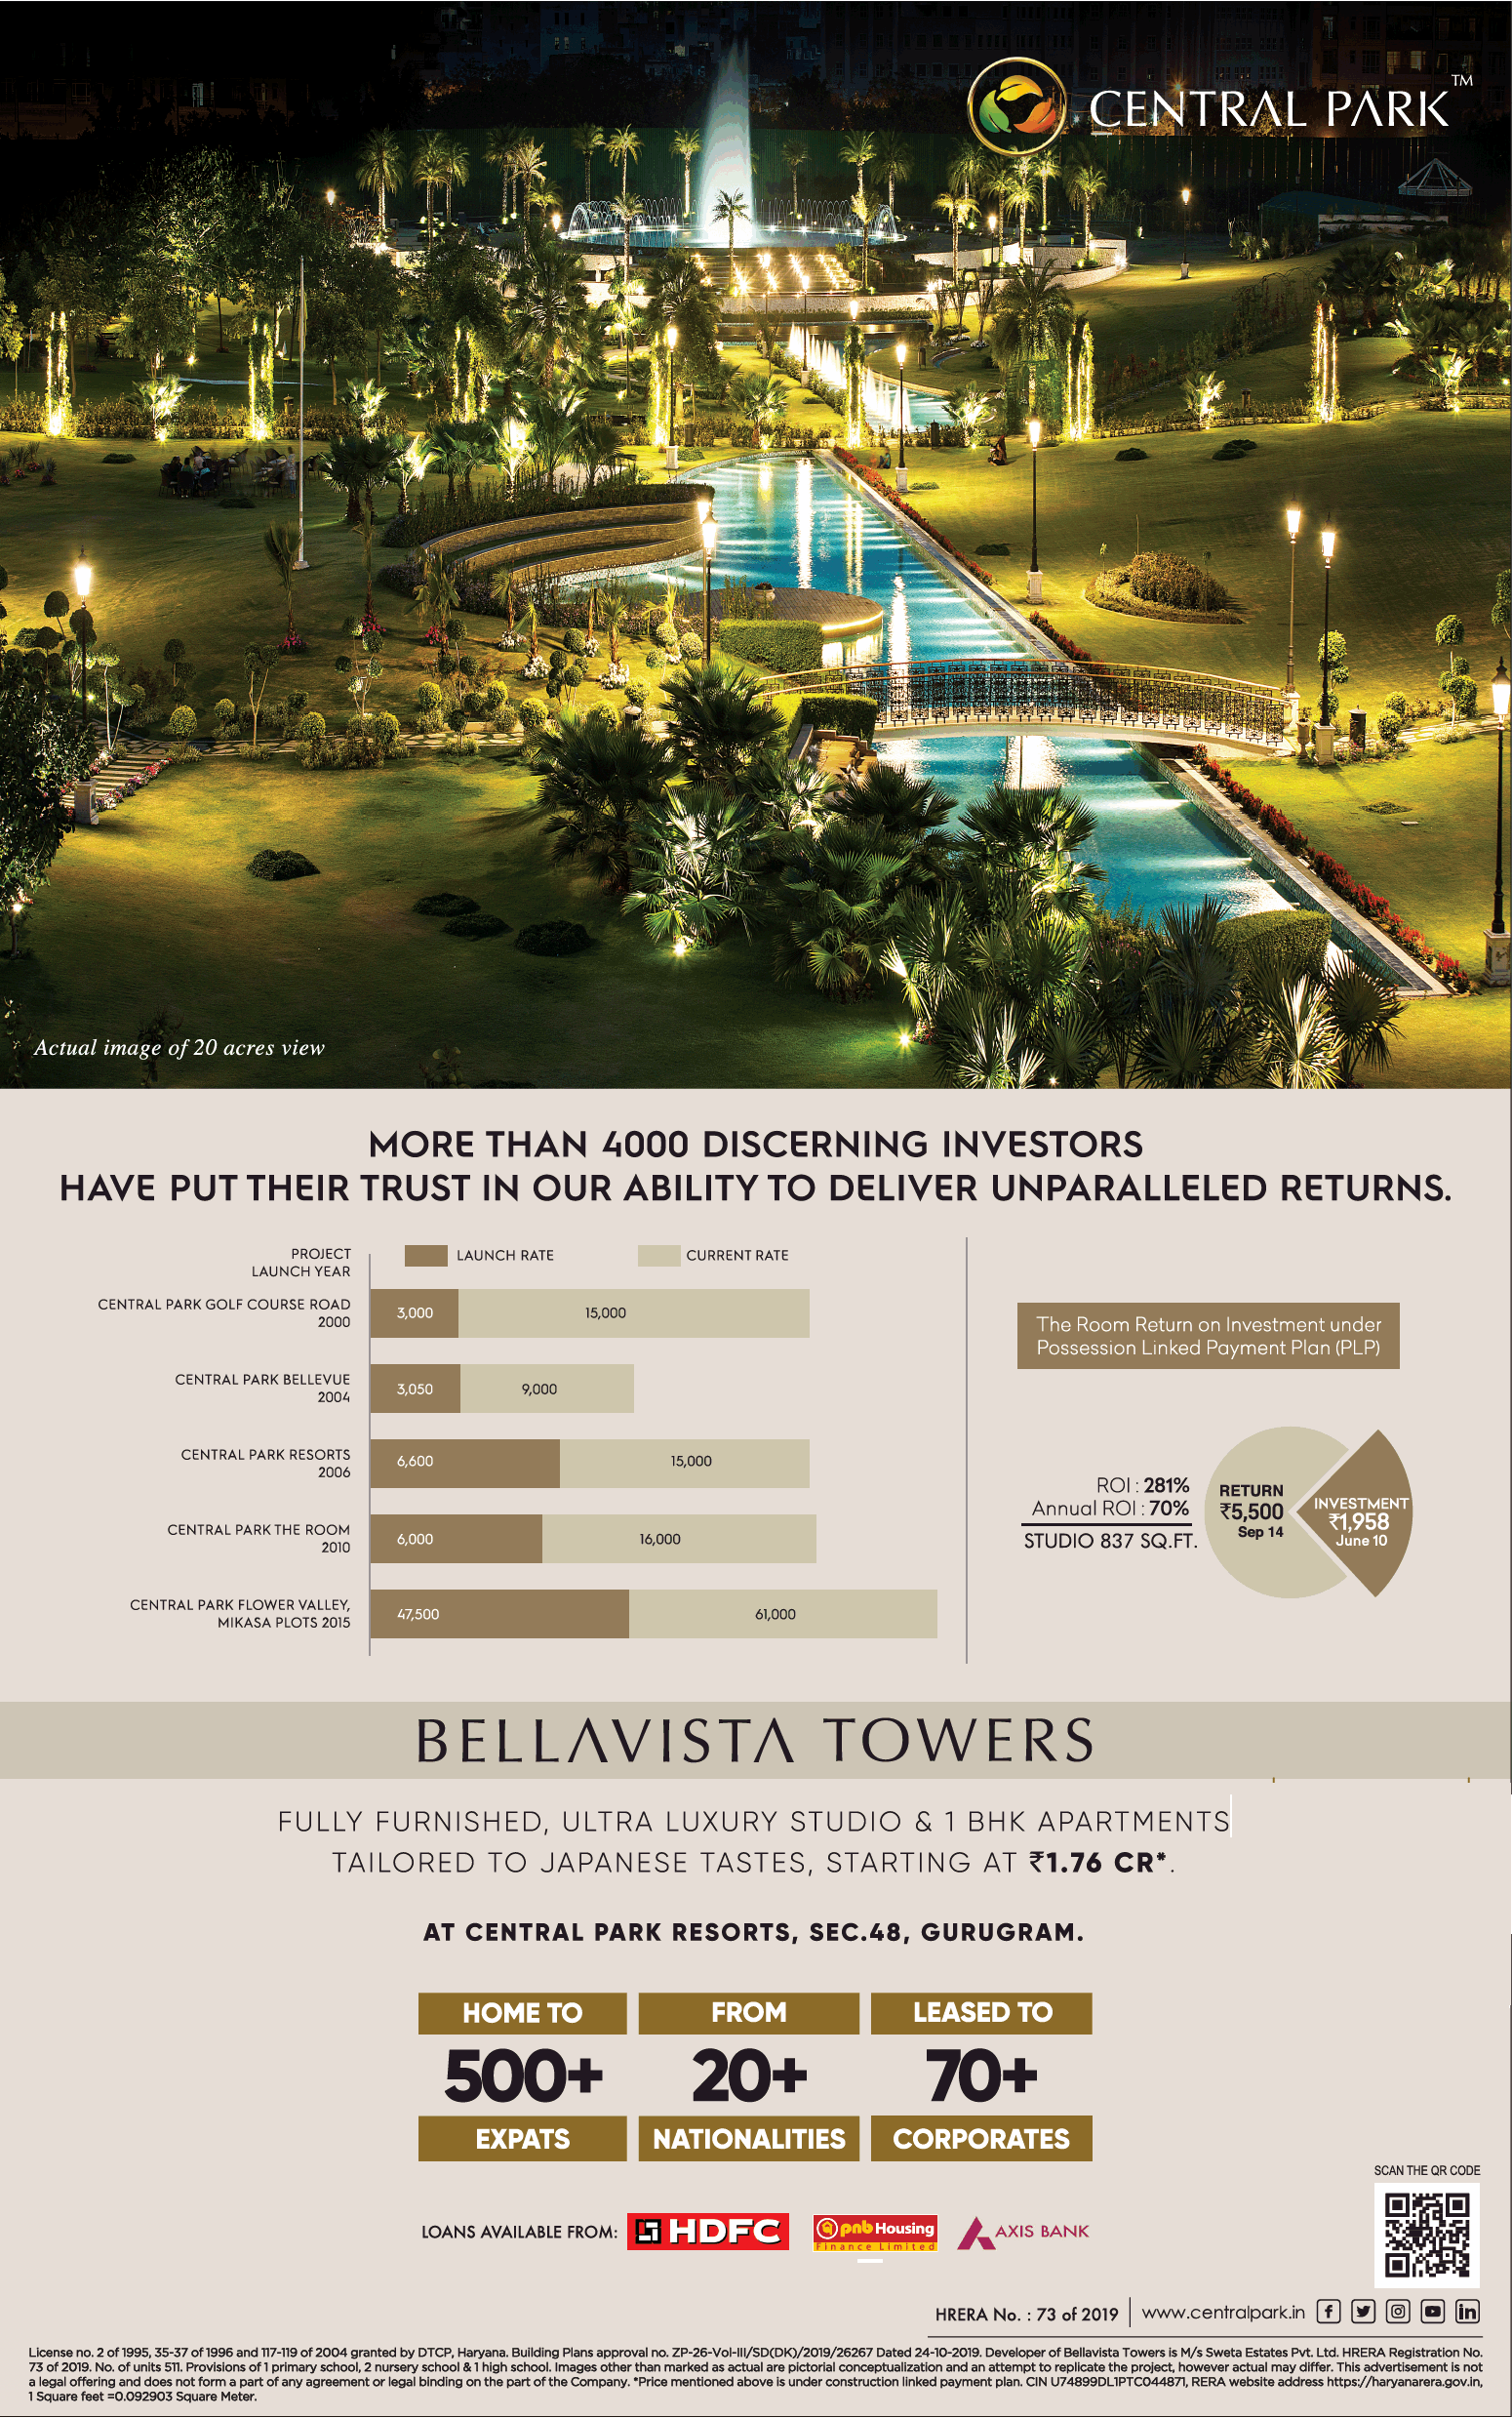 1 BHK apartment starting Rs 1.76 Cr at Central Park Bellavista Towers in Gurgaon Update